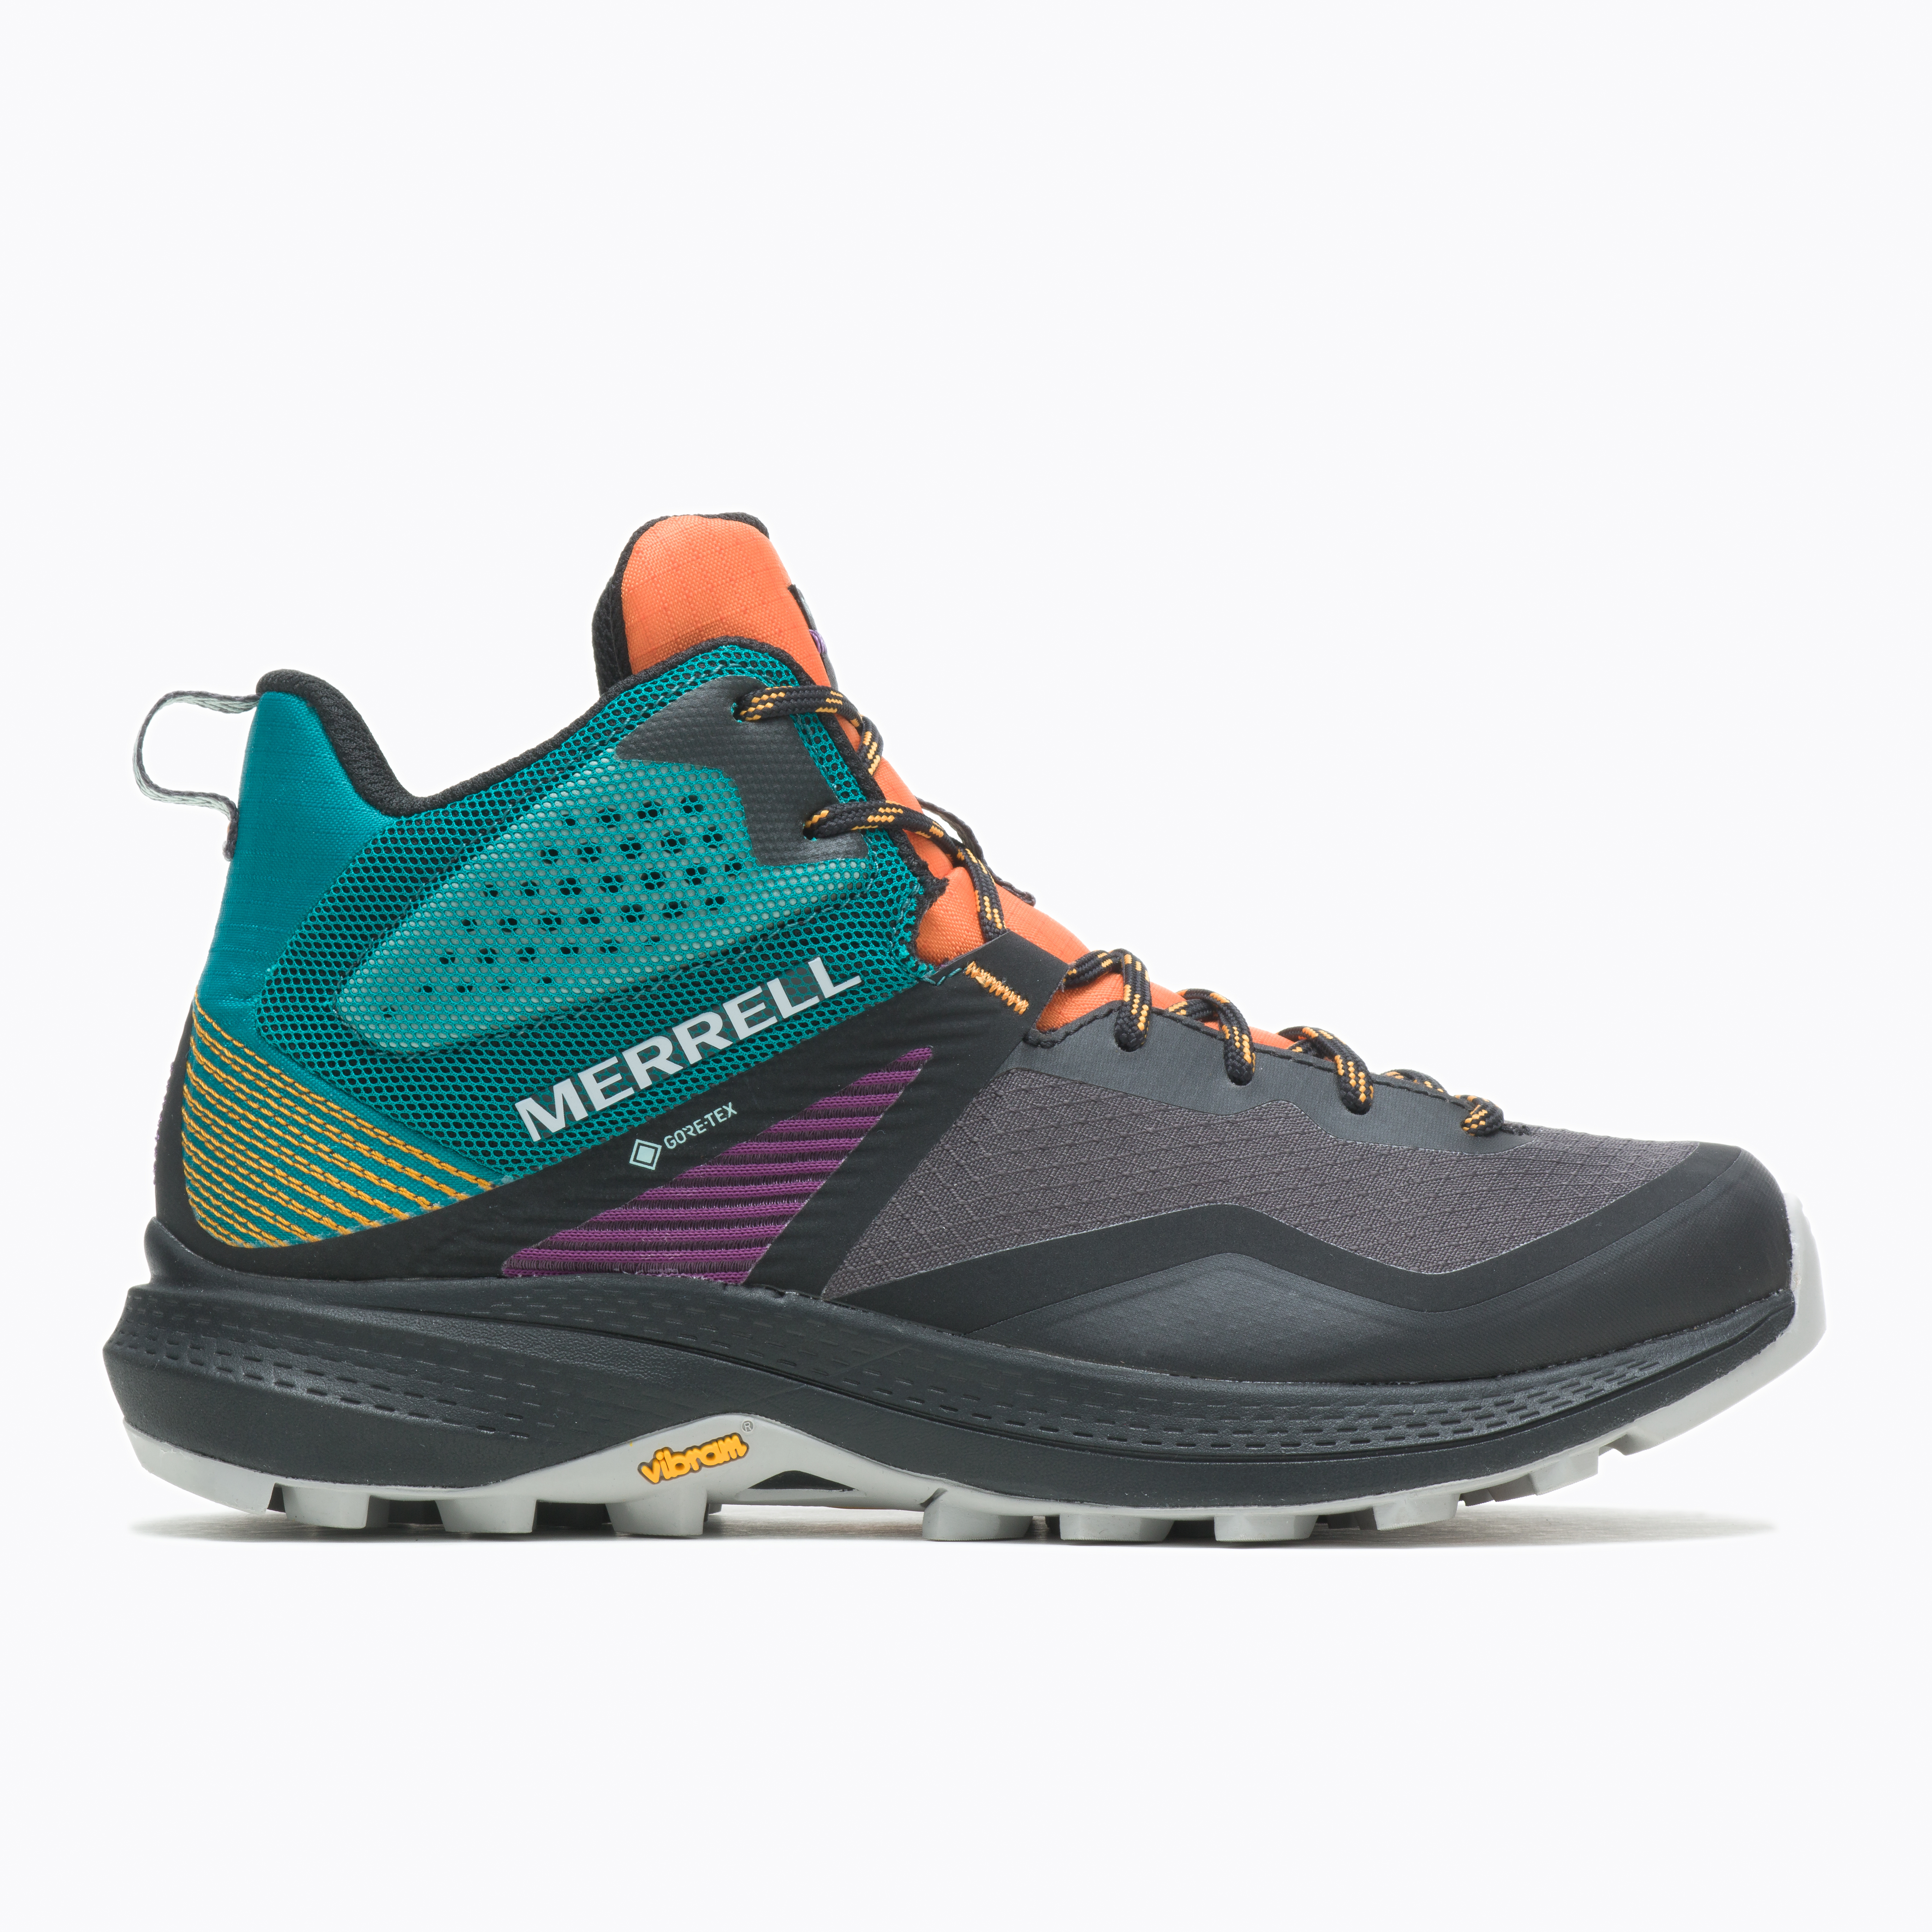 Merrell hiking boot IndyBest